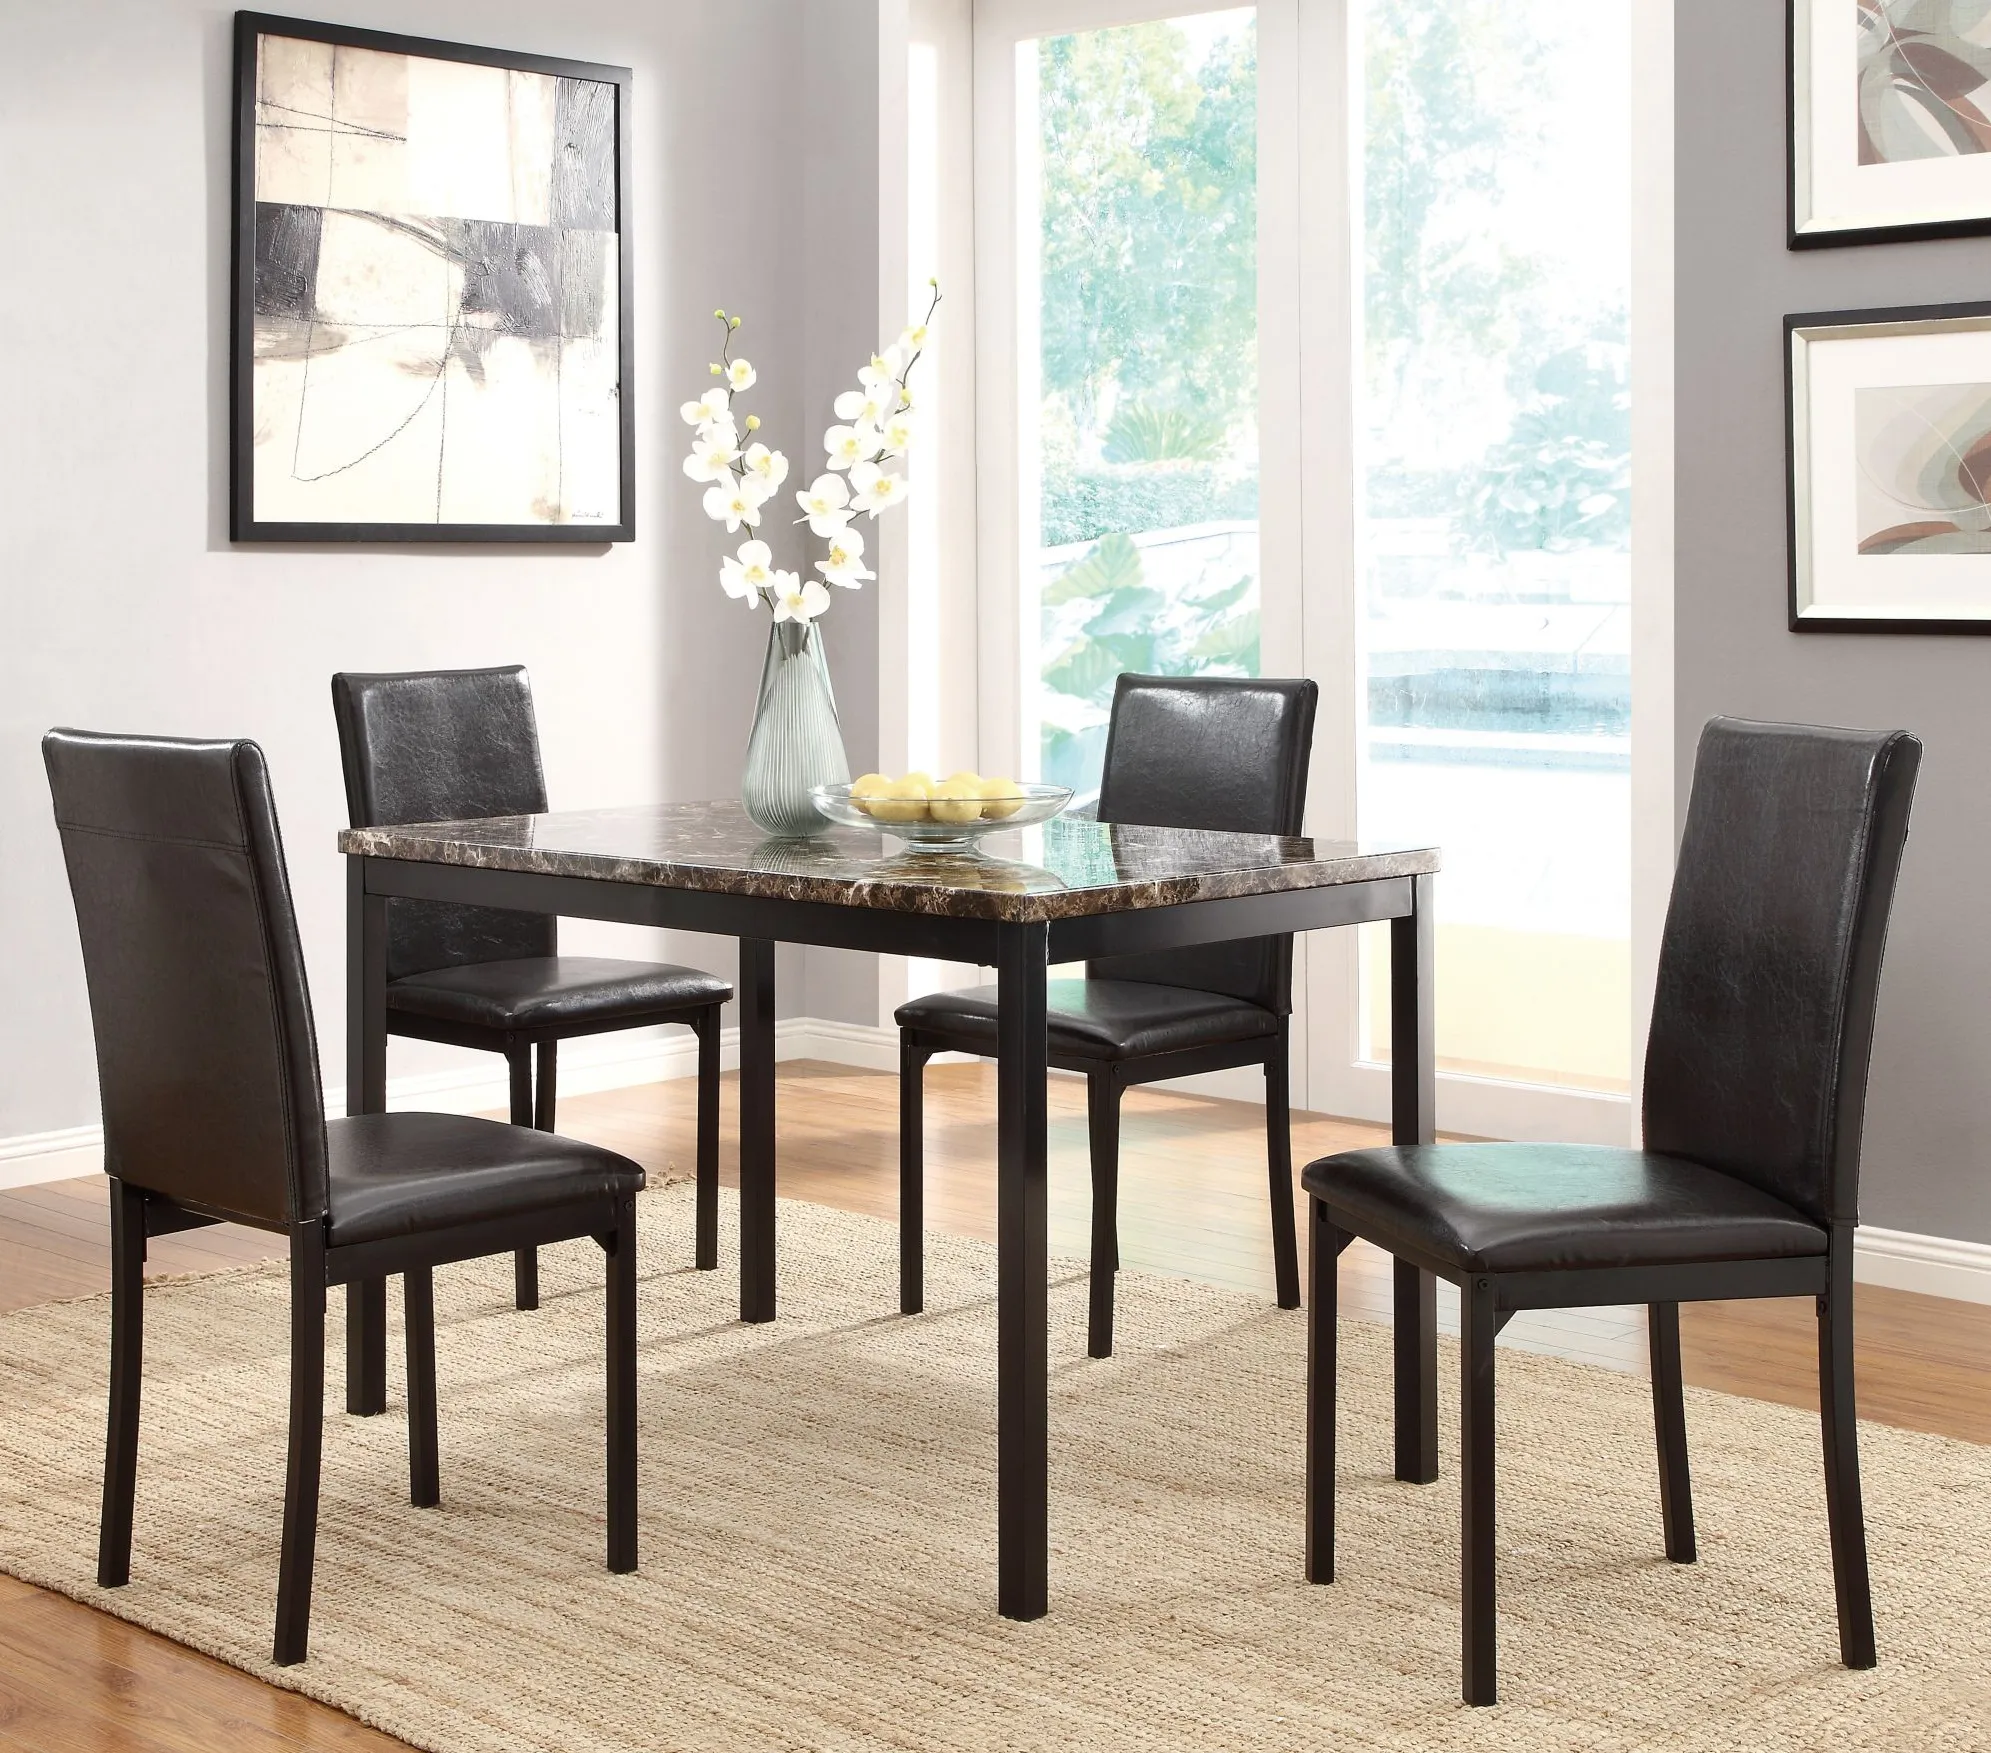 Paseo 5-pc Dining Set in Black by Homelegance